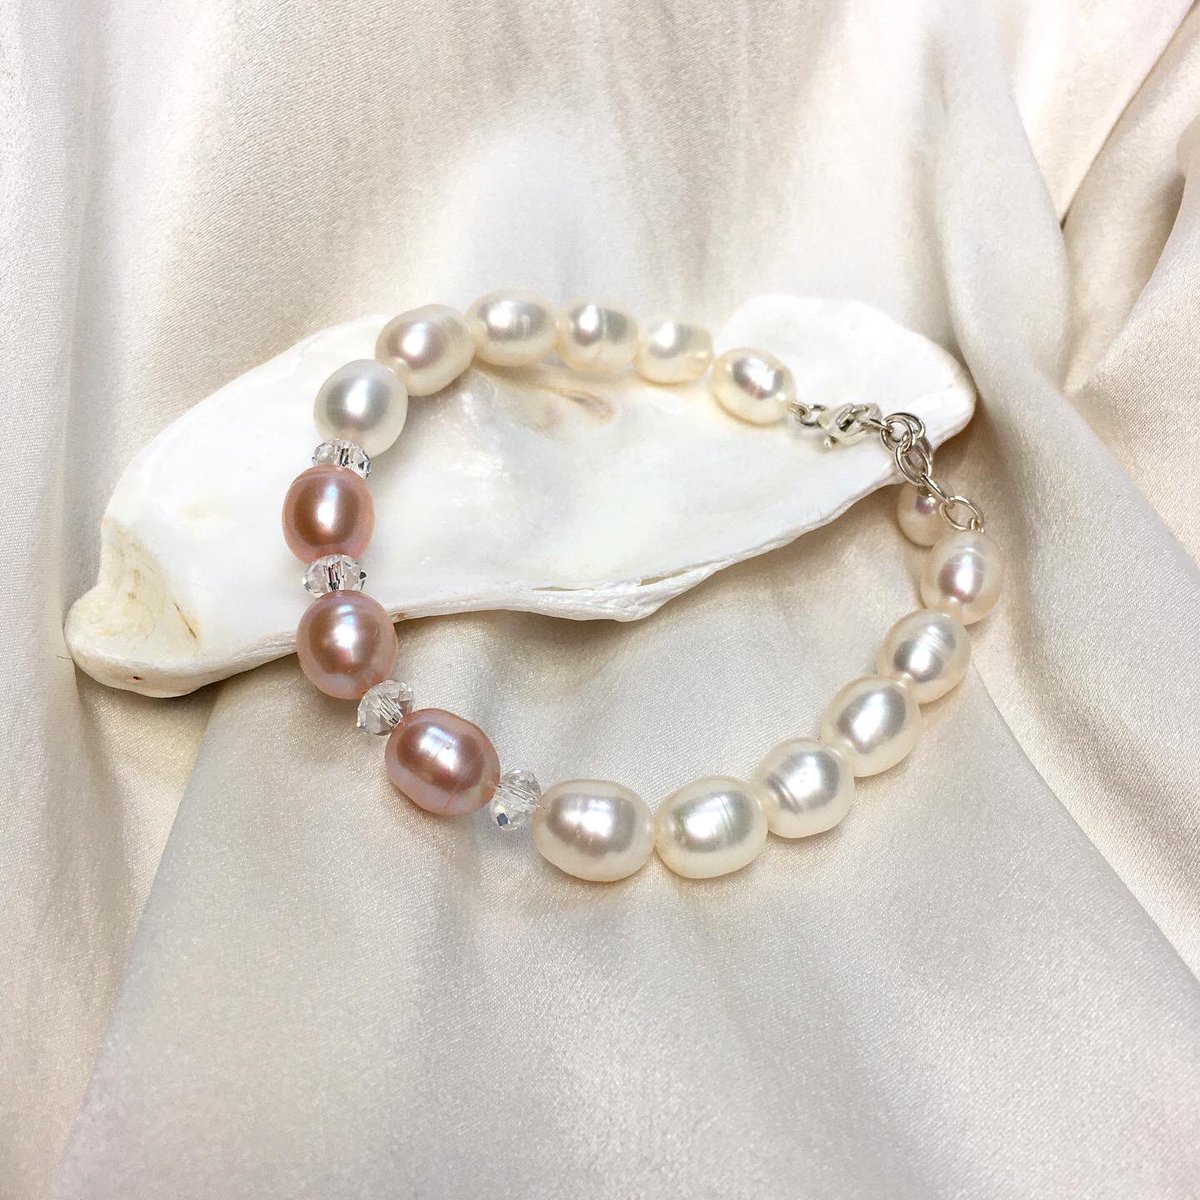 My Beautifully Handmade shop is now full of my gorgeous new collection. 

All my handmade jewellery is an exclusive, one of a kind, item. 

Every item is unique, each piece lovingly handmade. 

beautifullyhandmade.co.uk/store/Naima-pe…
#handmadegiftsuk #uniquegifts #pearls